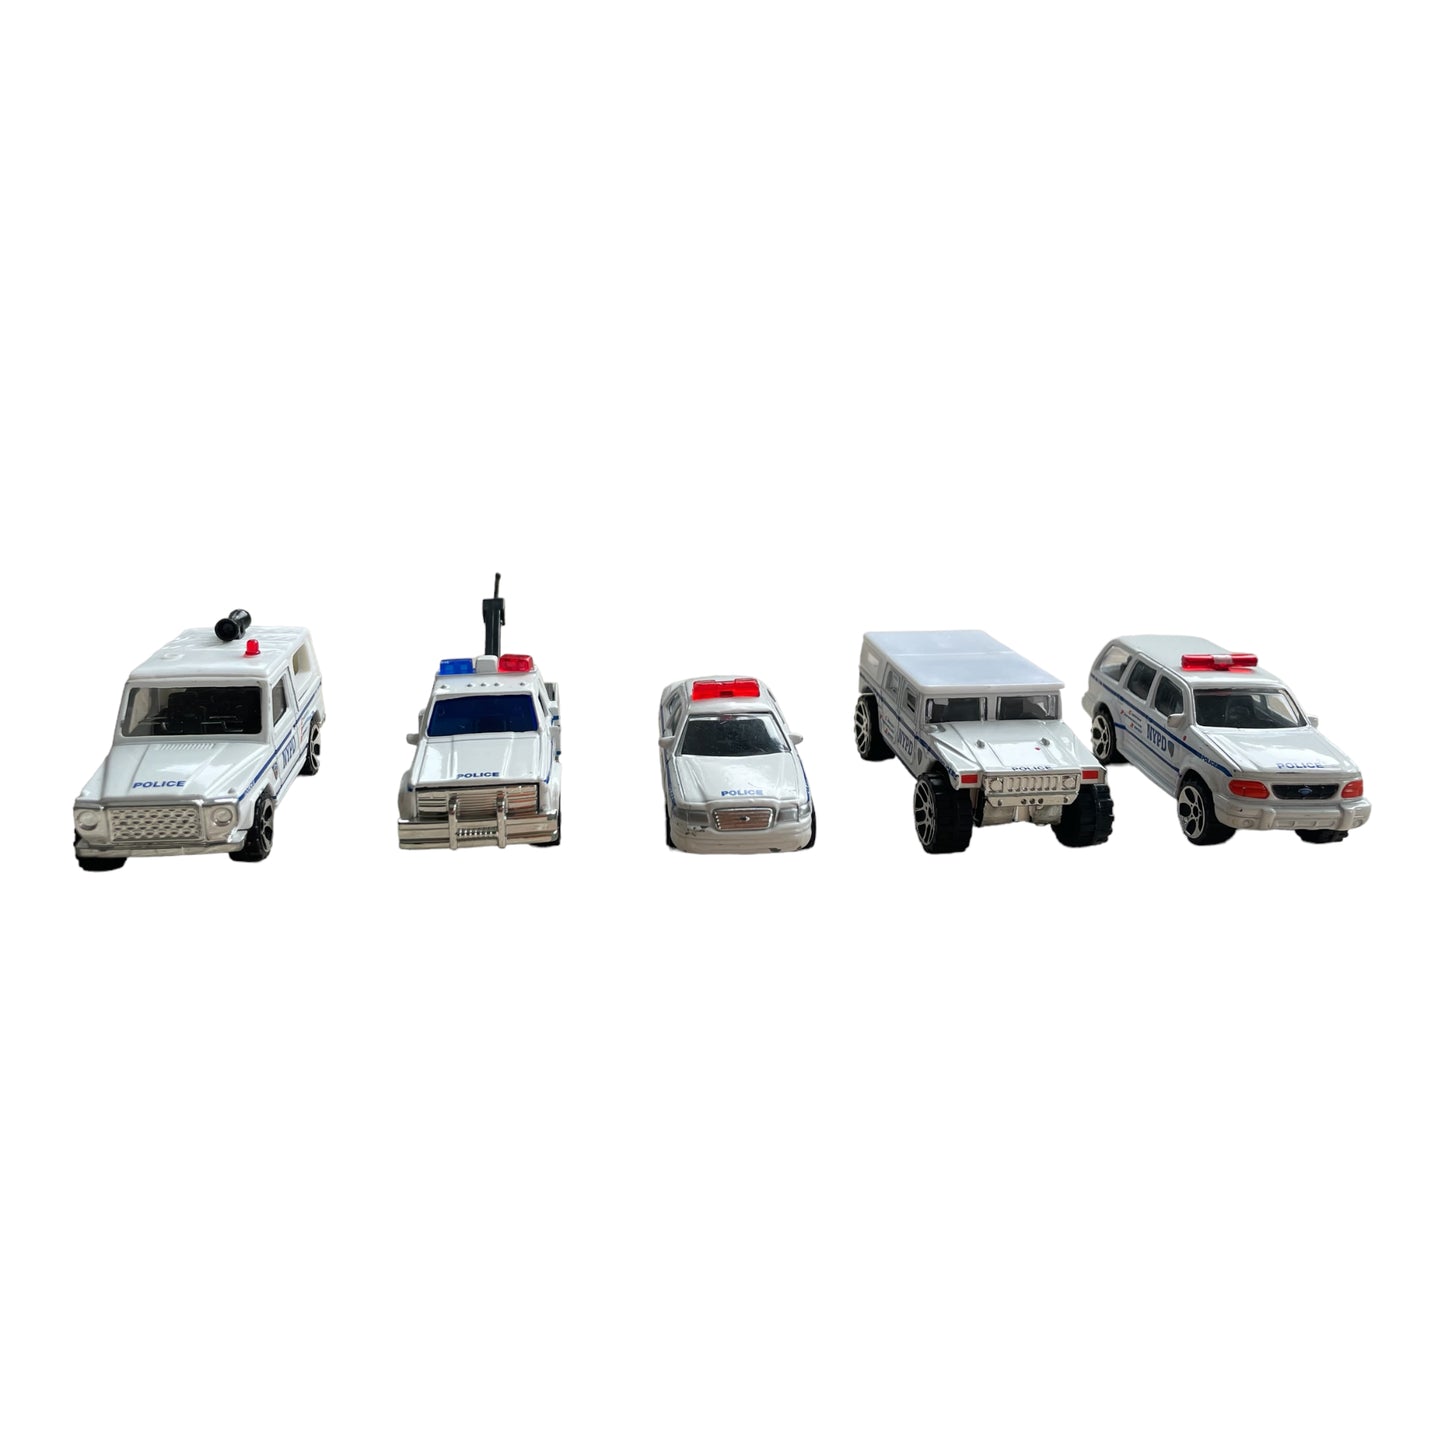 NYPD Vehicle set - Police cars - Gift Pack